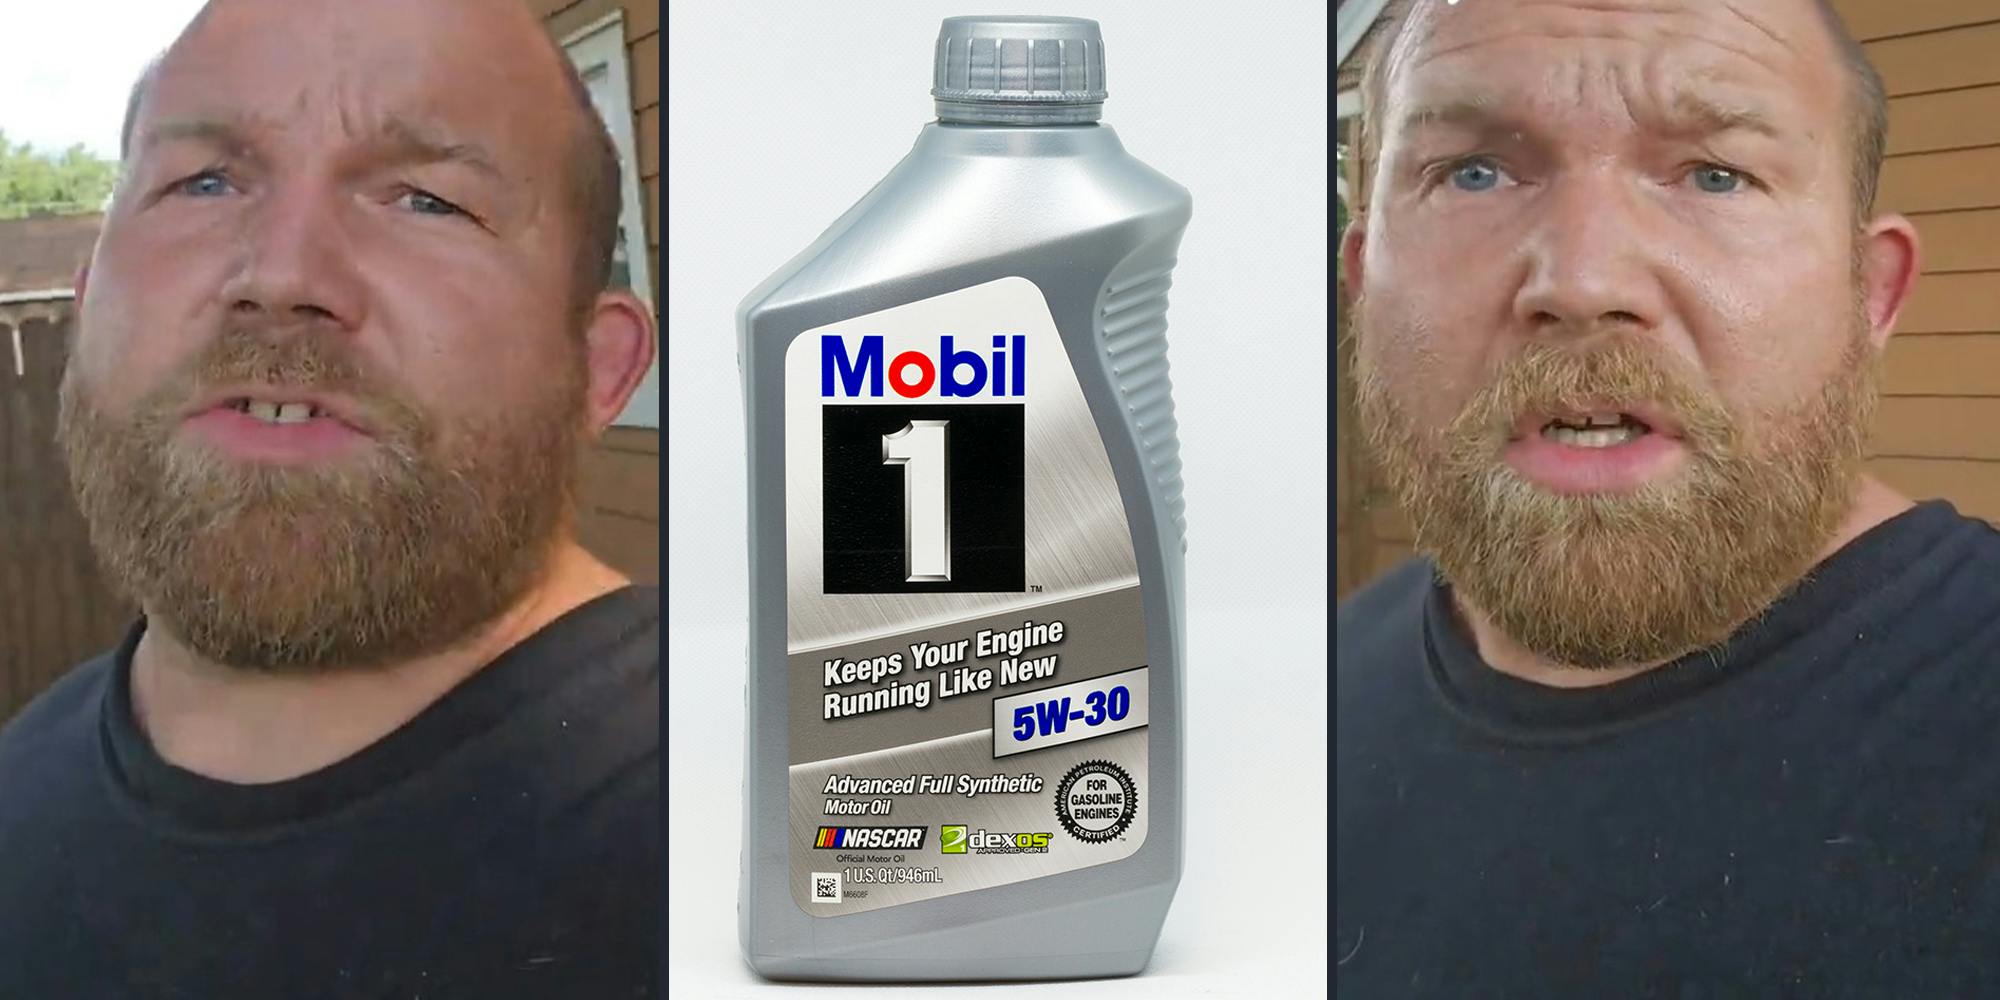 Mechanic says Mobil 1 oil is 'decent.' There's just one problem